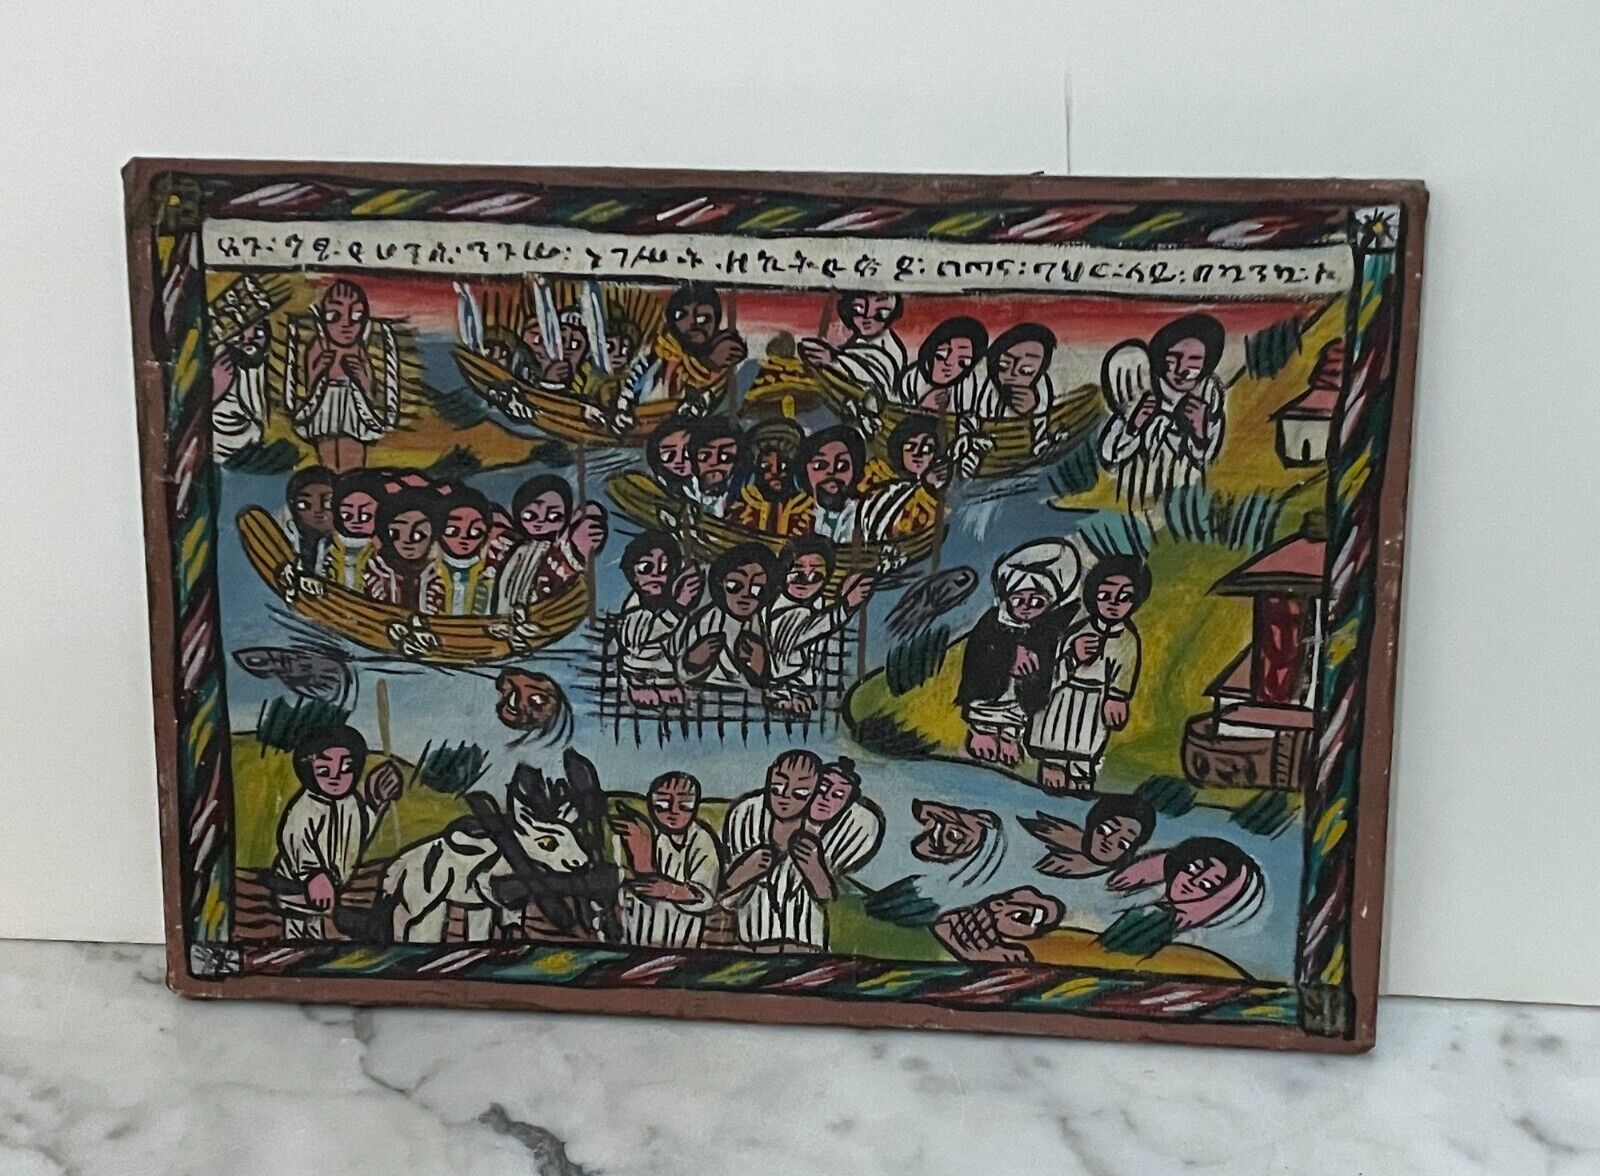 OLD ETHIOPIAN ORTHODOX CHRISTIAN FOLK ART PAINTING ON CANVAS OF A BIBLICAL STORY